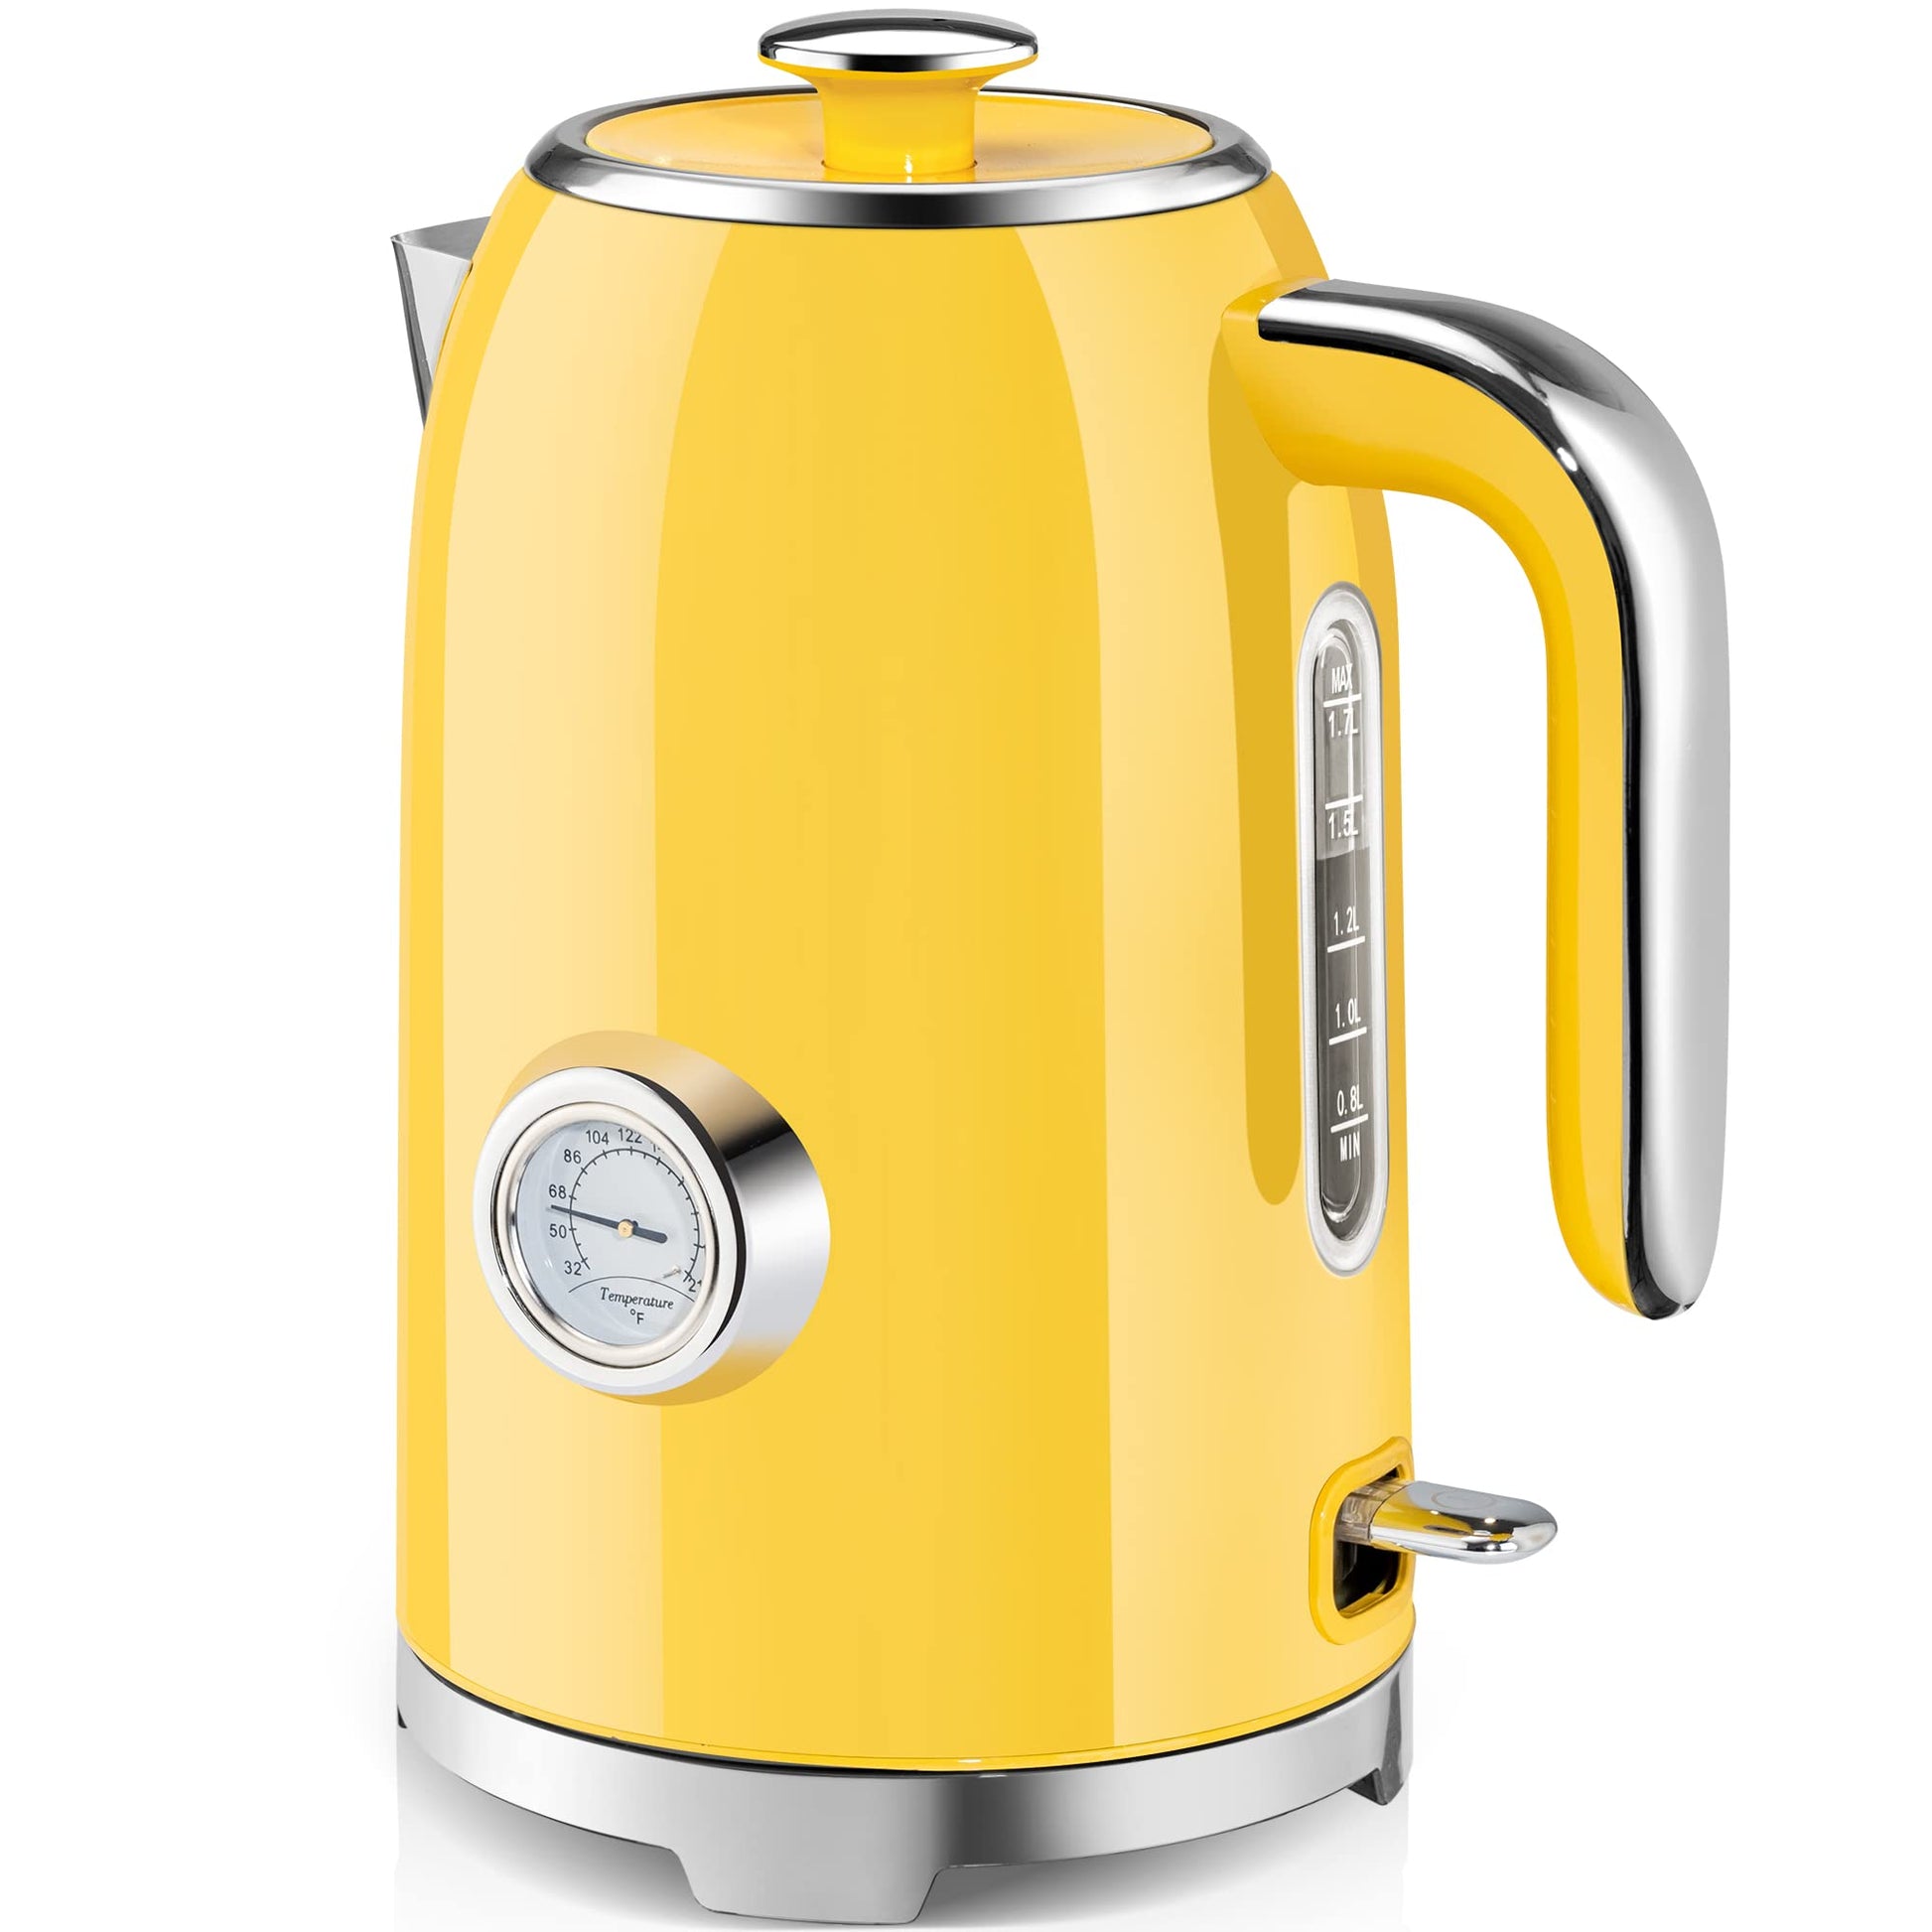 Retro Electric Kettle Stainless Steel 1.8L Tea Kettle, Hot Water Boiler with Thermometer, LED Light, Fast Boiling, Auto Shut-Off&Boil-Dry Protection (